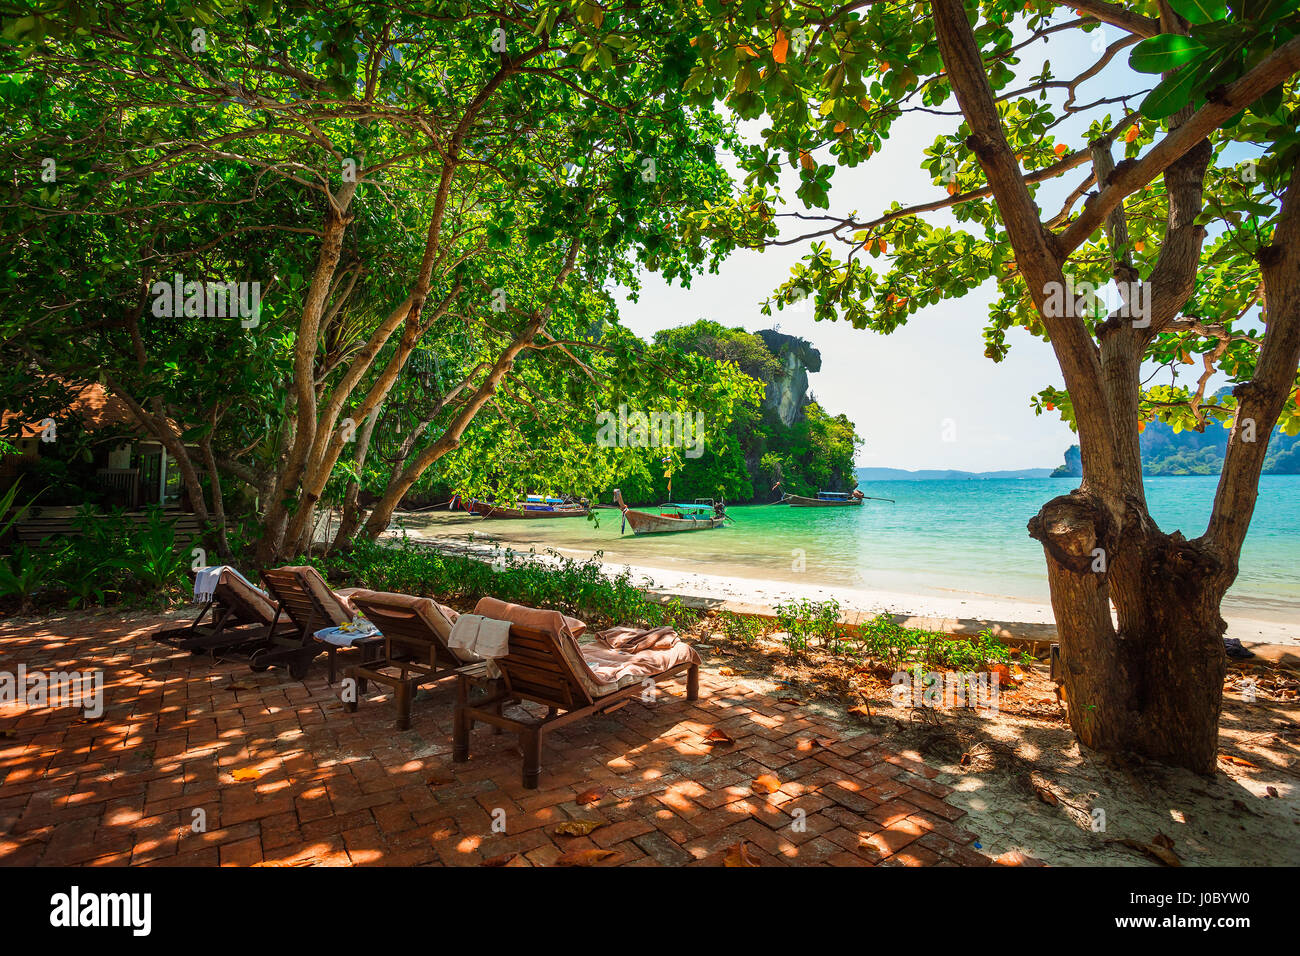 Quiet place with beach chairs to enjoy the view at Railay beach, Ao Nang, Thailand Stock Photo